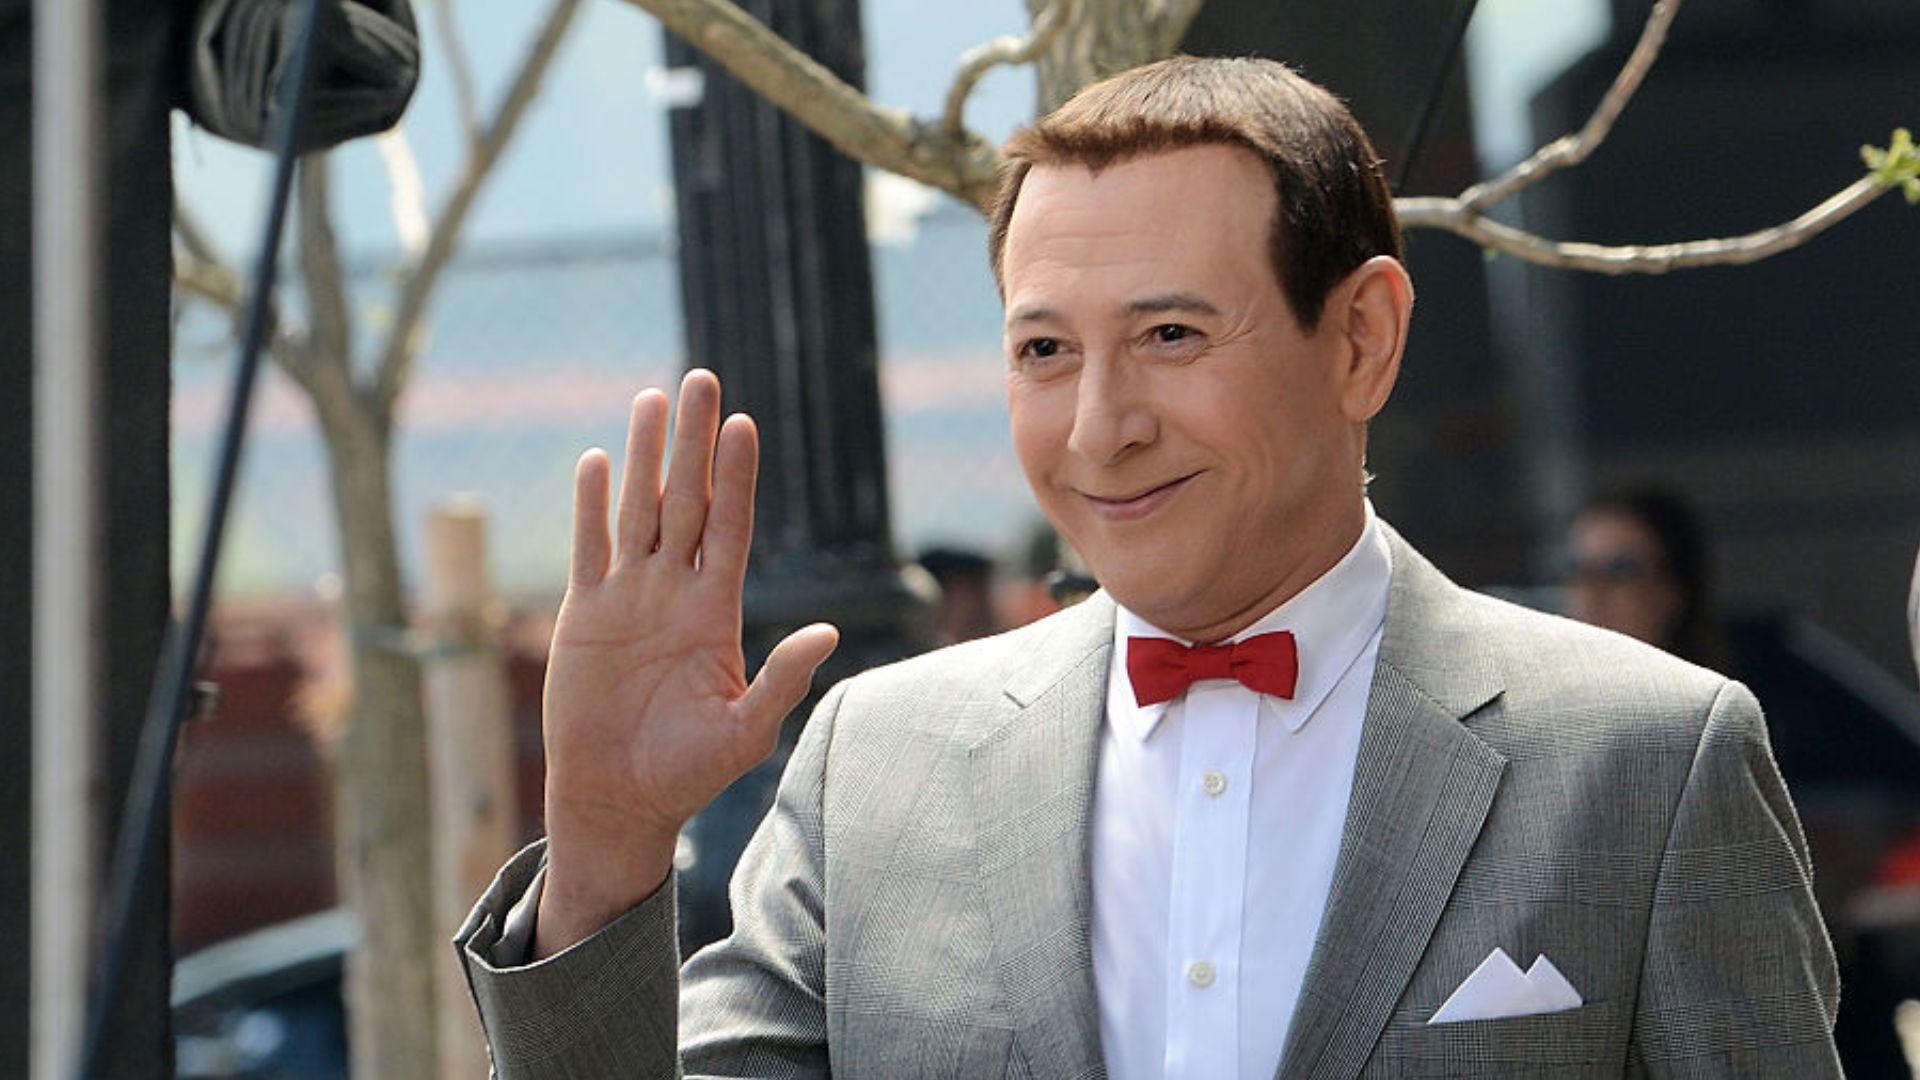 From Stage to Stardom: Remembering Pee-Wee Herman Actor Paul Reubens